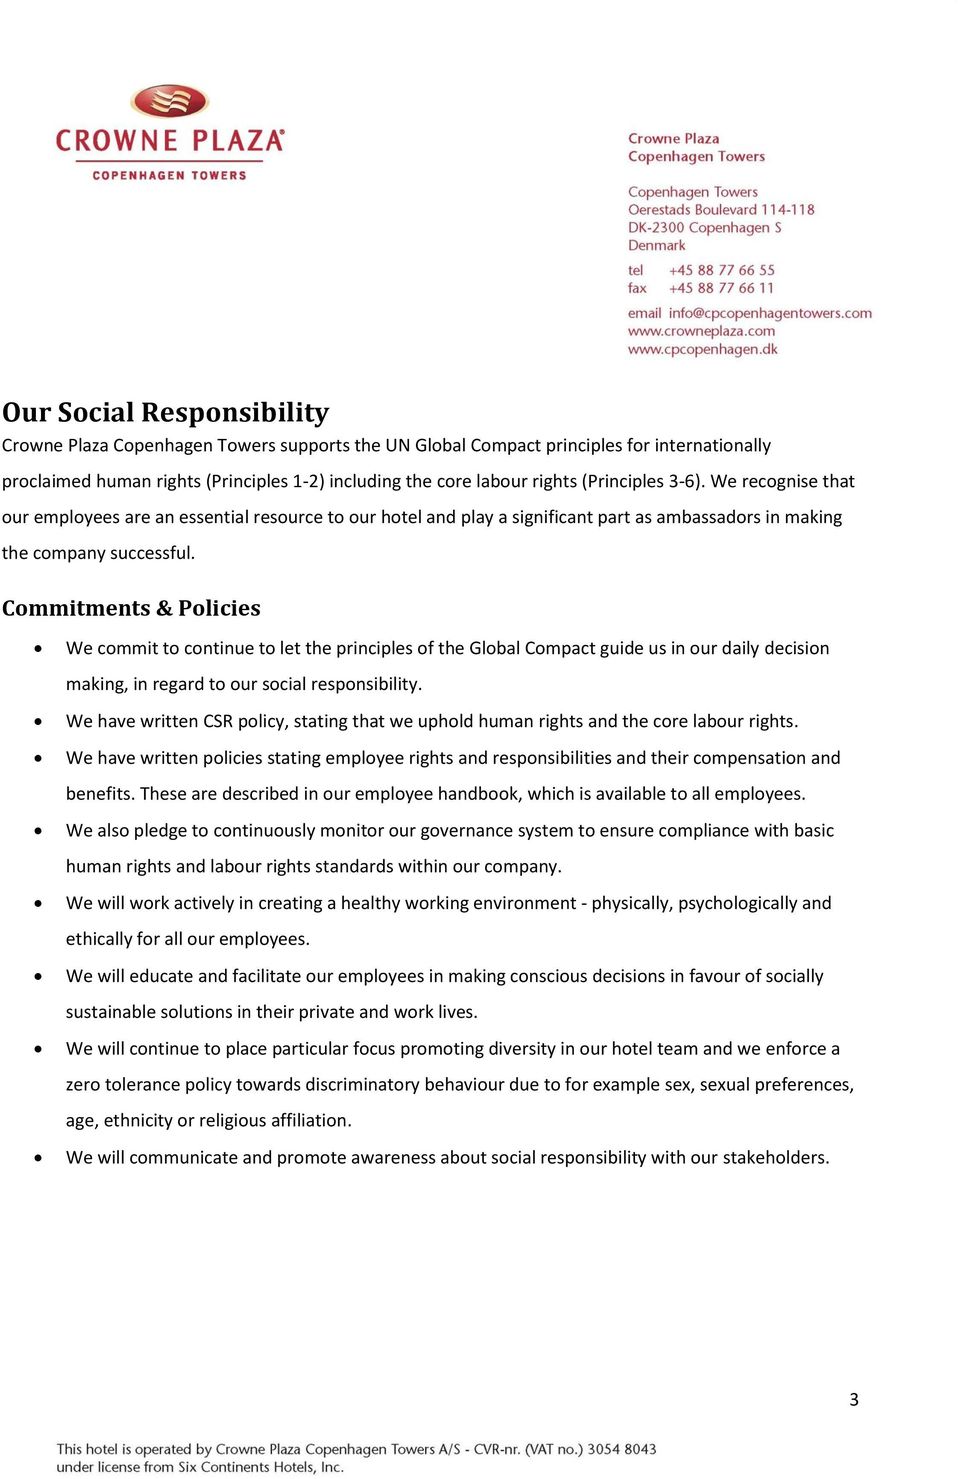 Commitments & Policies We commit to continue to let the principles of the Global Compact guide us in our daily decision making, in regard to our social responsibility.